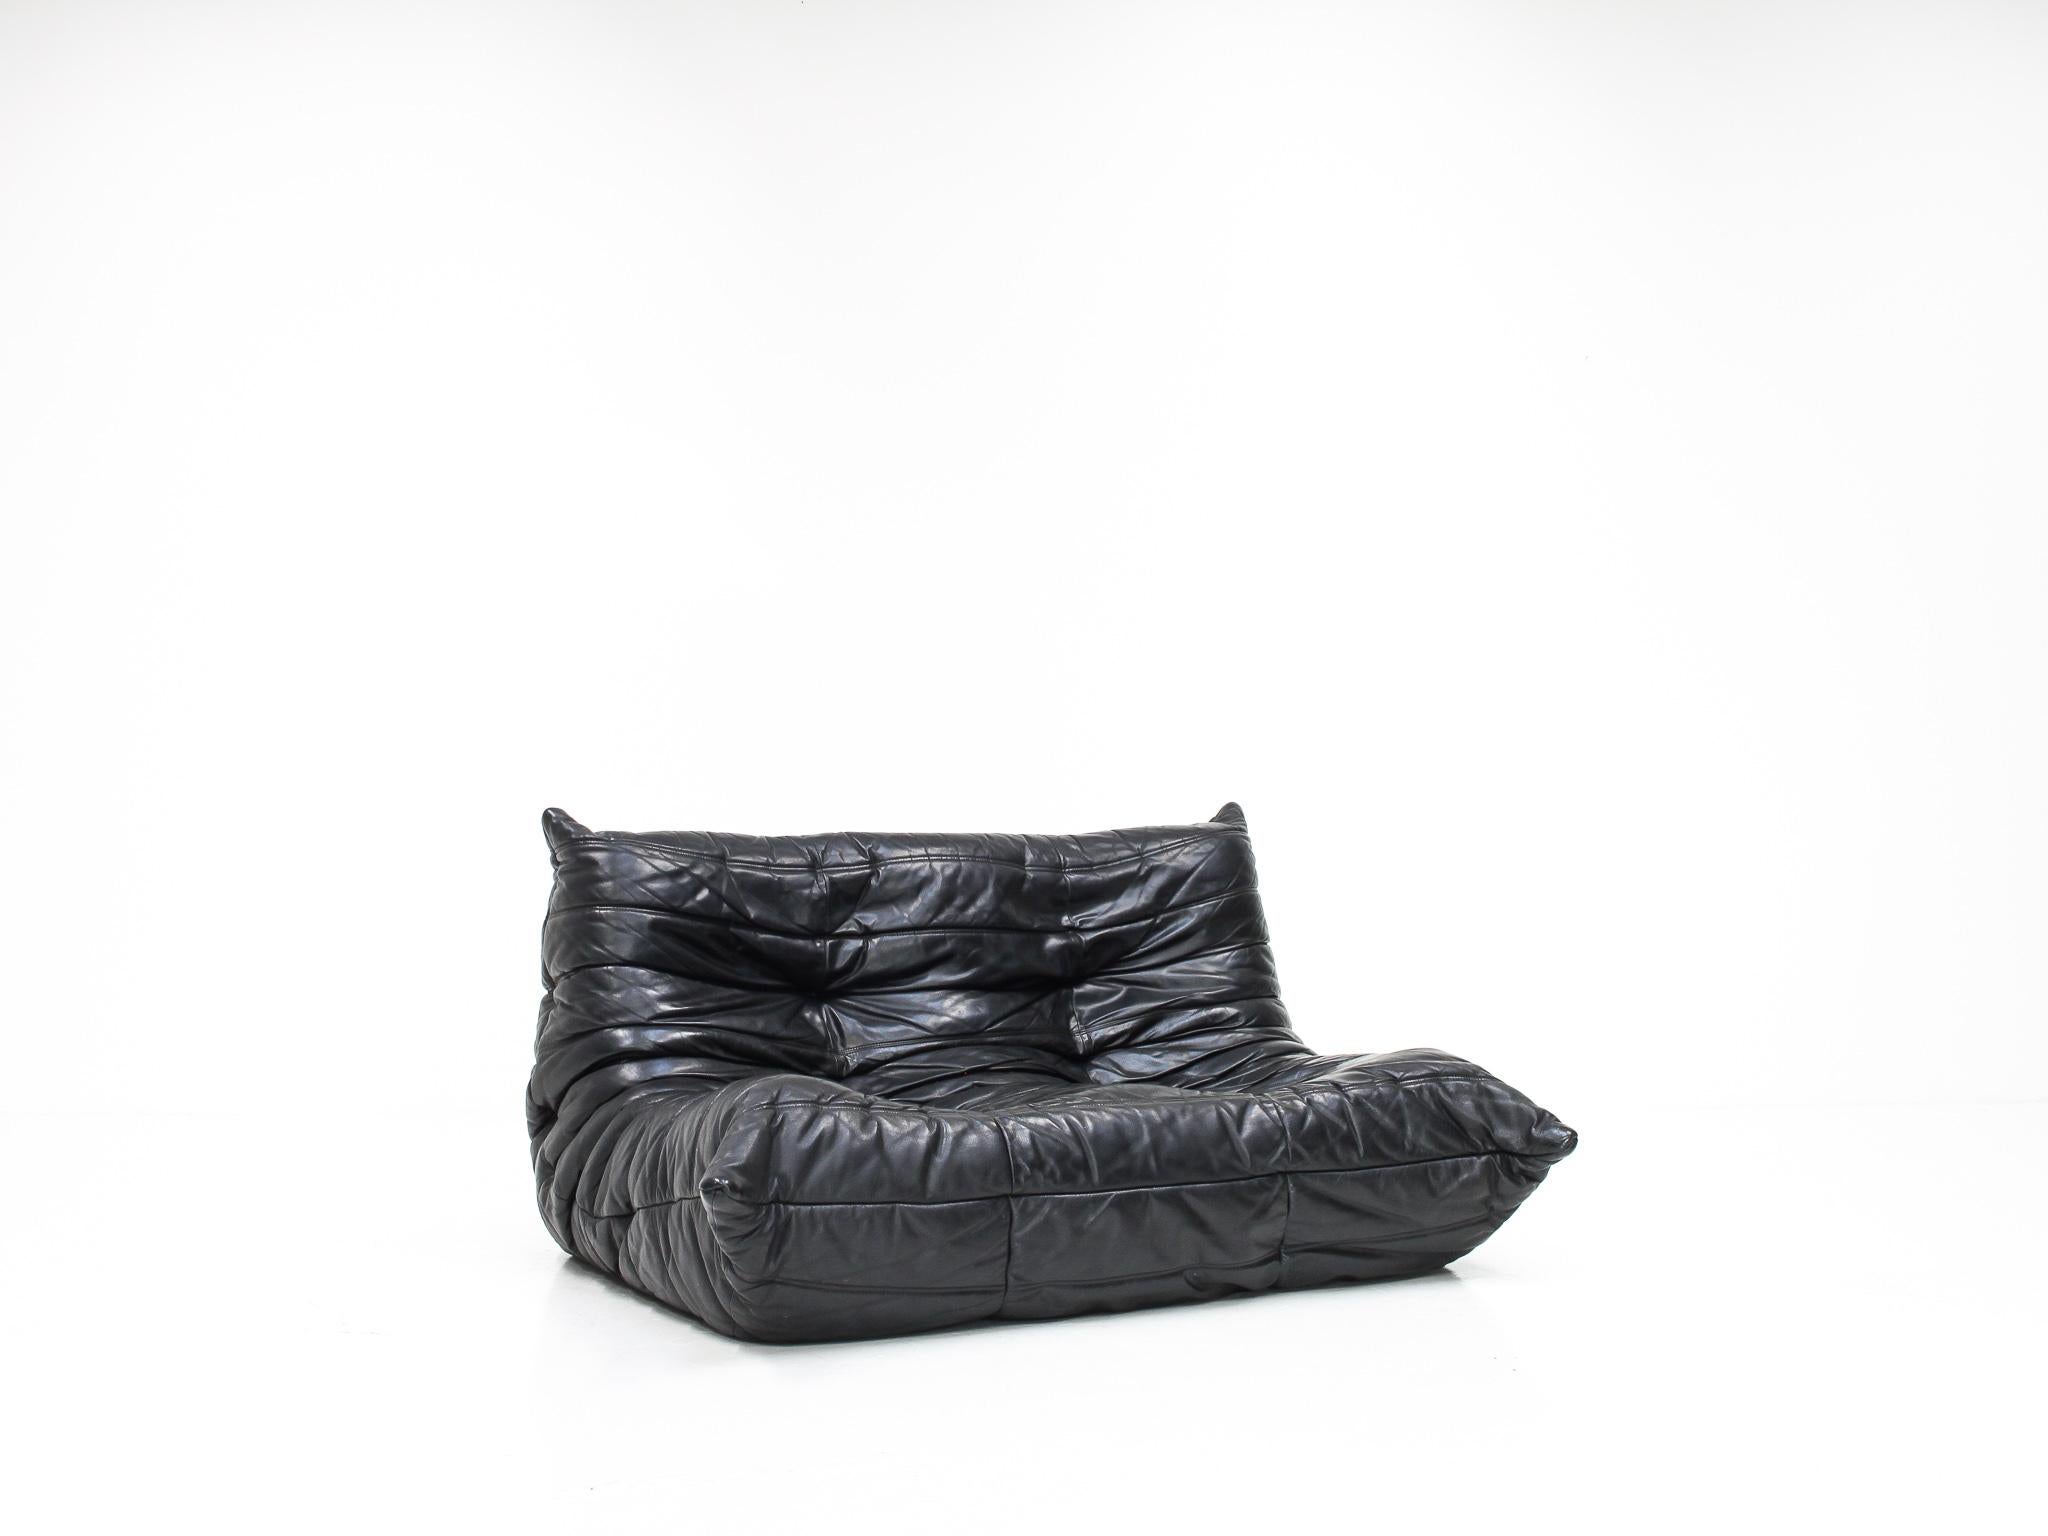 An early fireside single Togo 2-seater loveseat by Michel Ducaroy for Ligne Roset - created in 1973, France.

This is an earlier version dating from the late 1970s/early 1980s. It retains its original high-quality black leather upholstery.

The